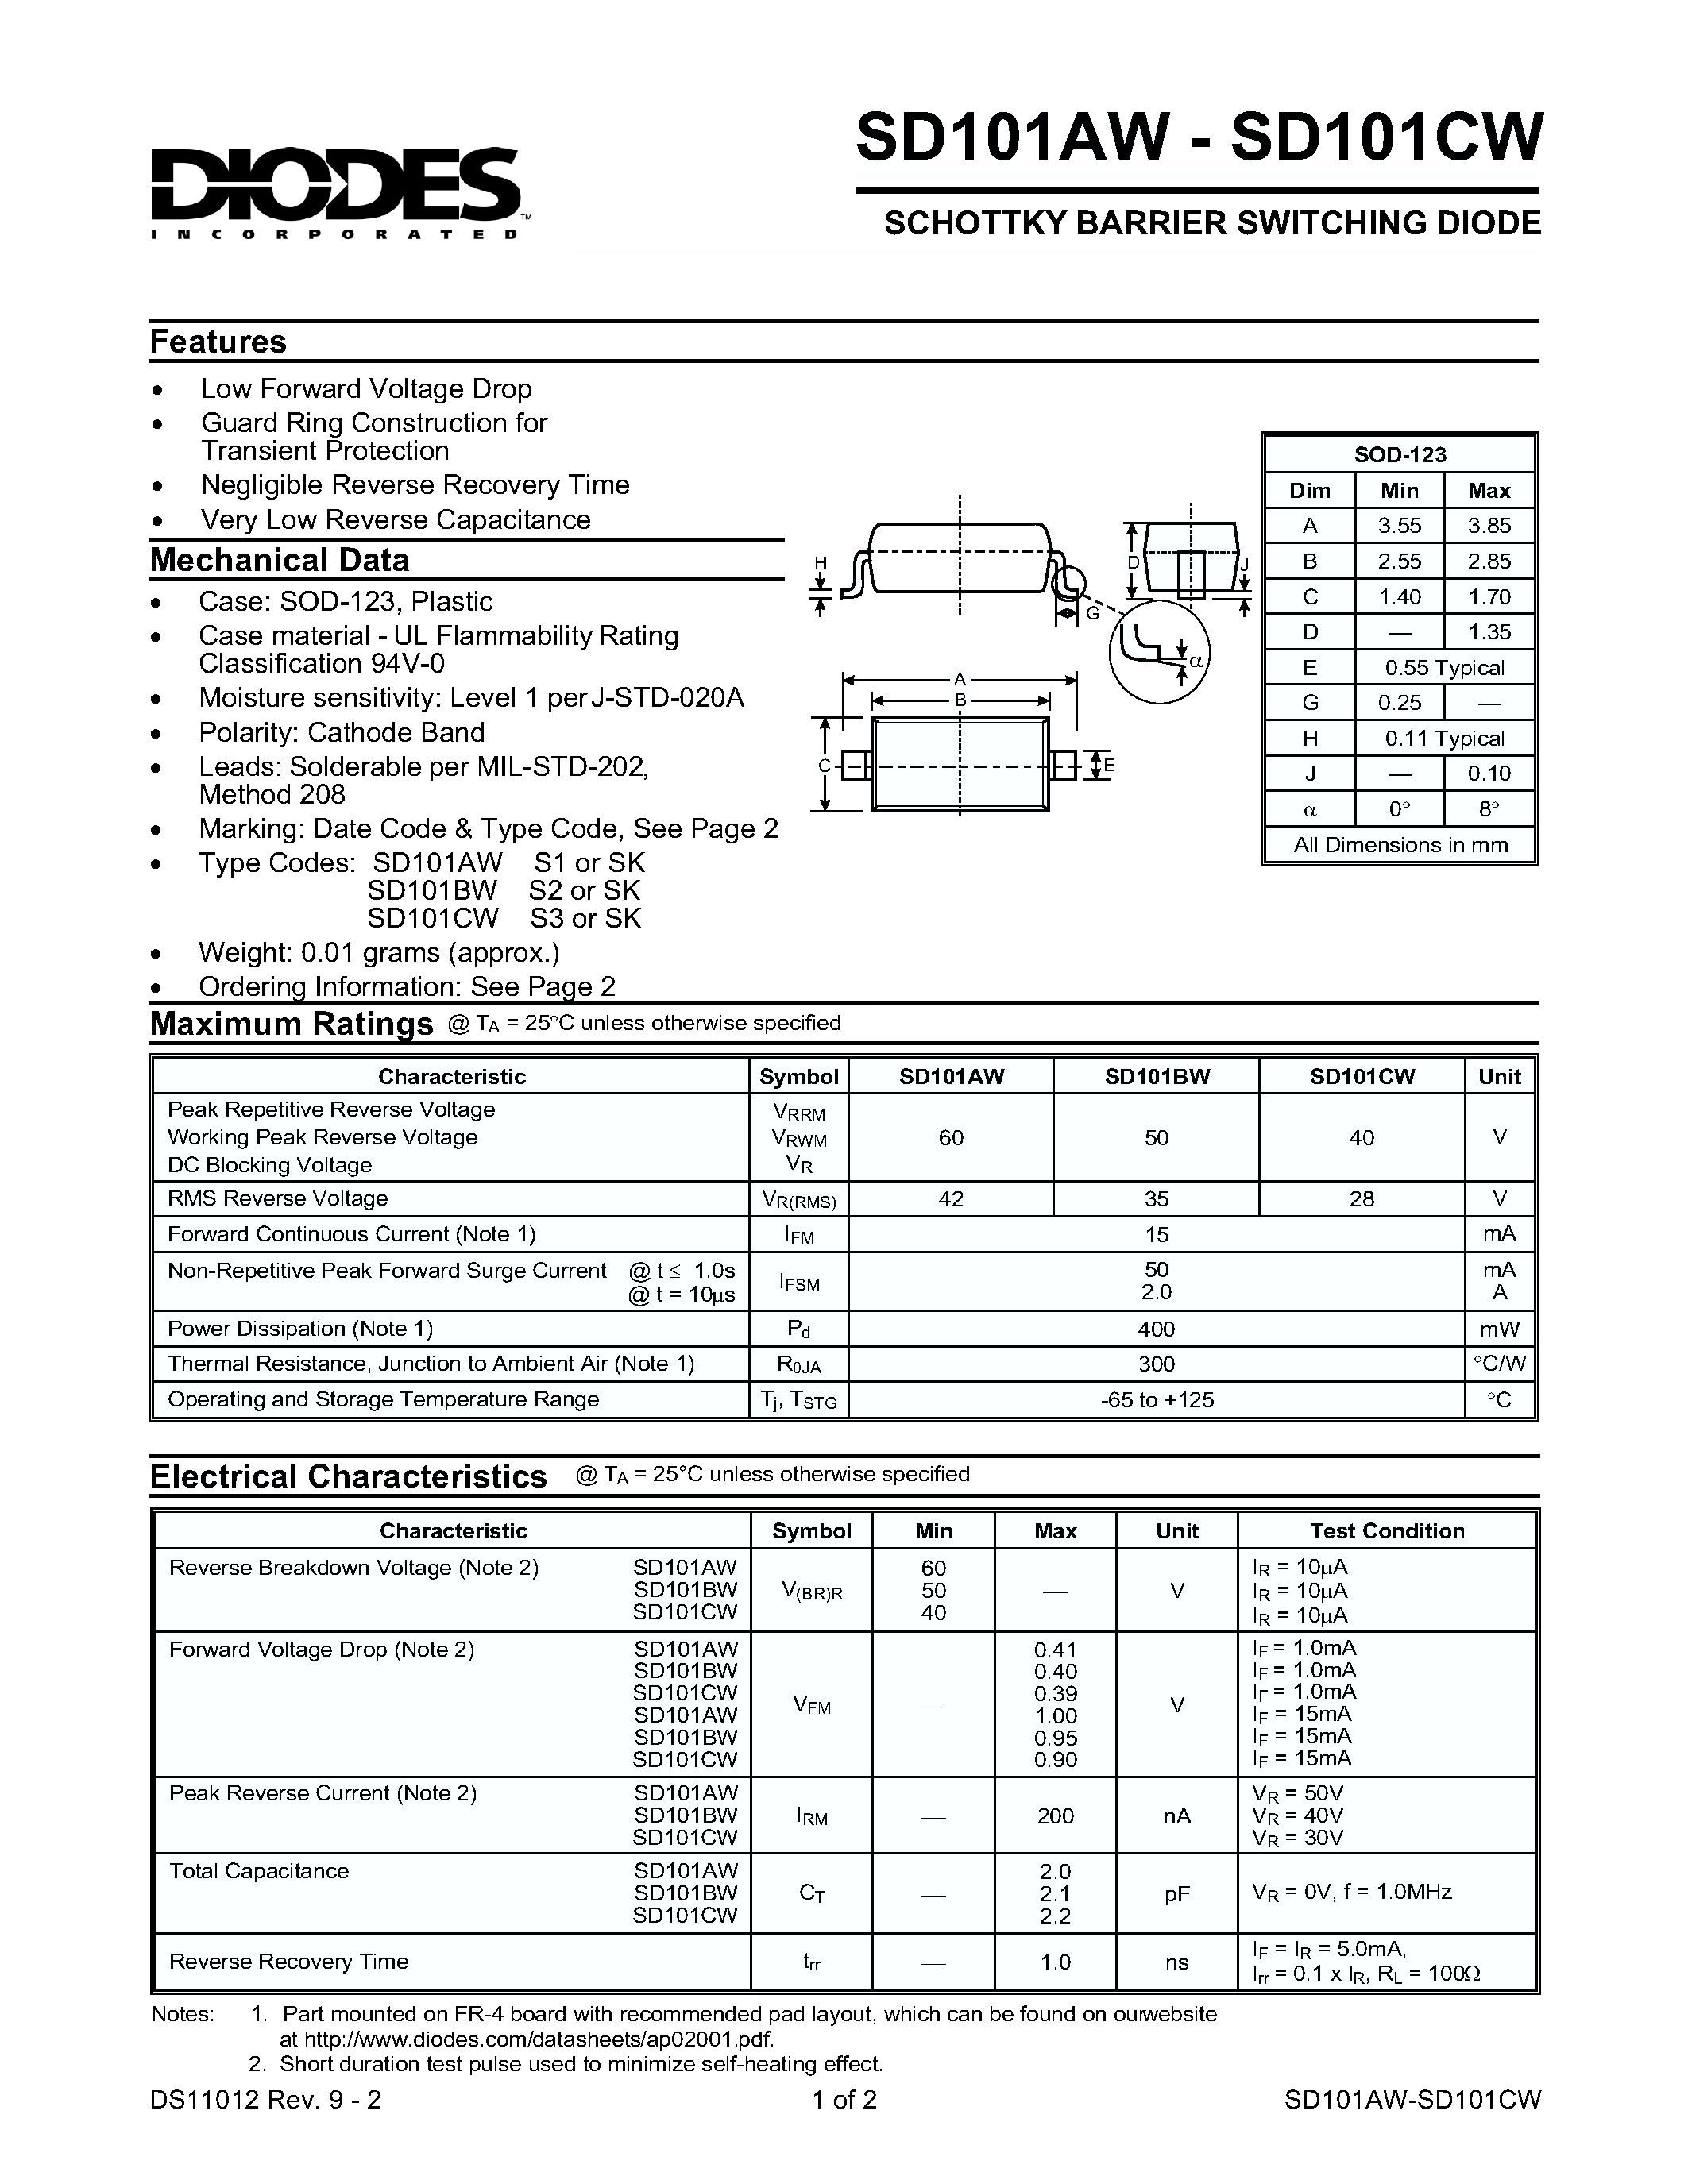 Datasheet SD101AW - (SD101AW - SD101CW) SURFACE MOUNT SCHOTTKY BARRIER DIODE page 1